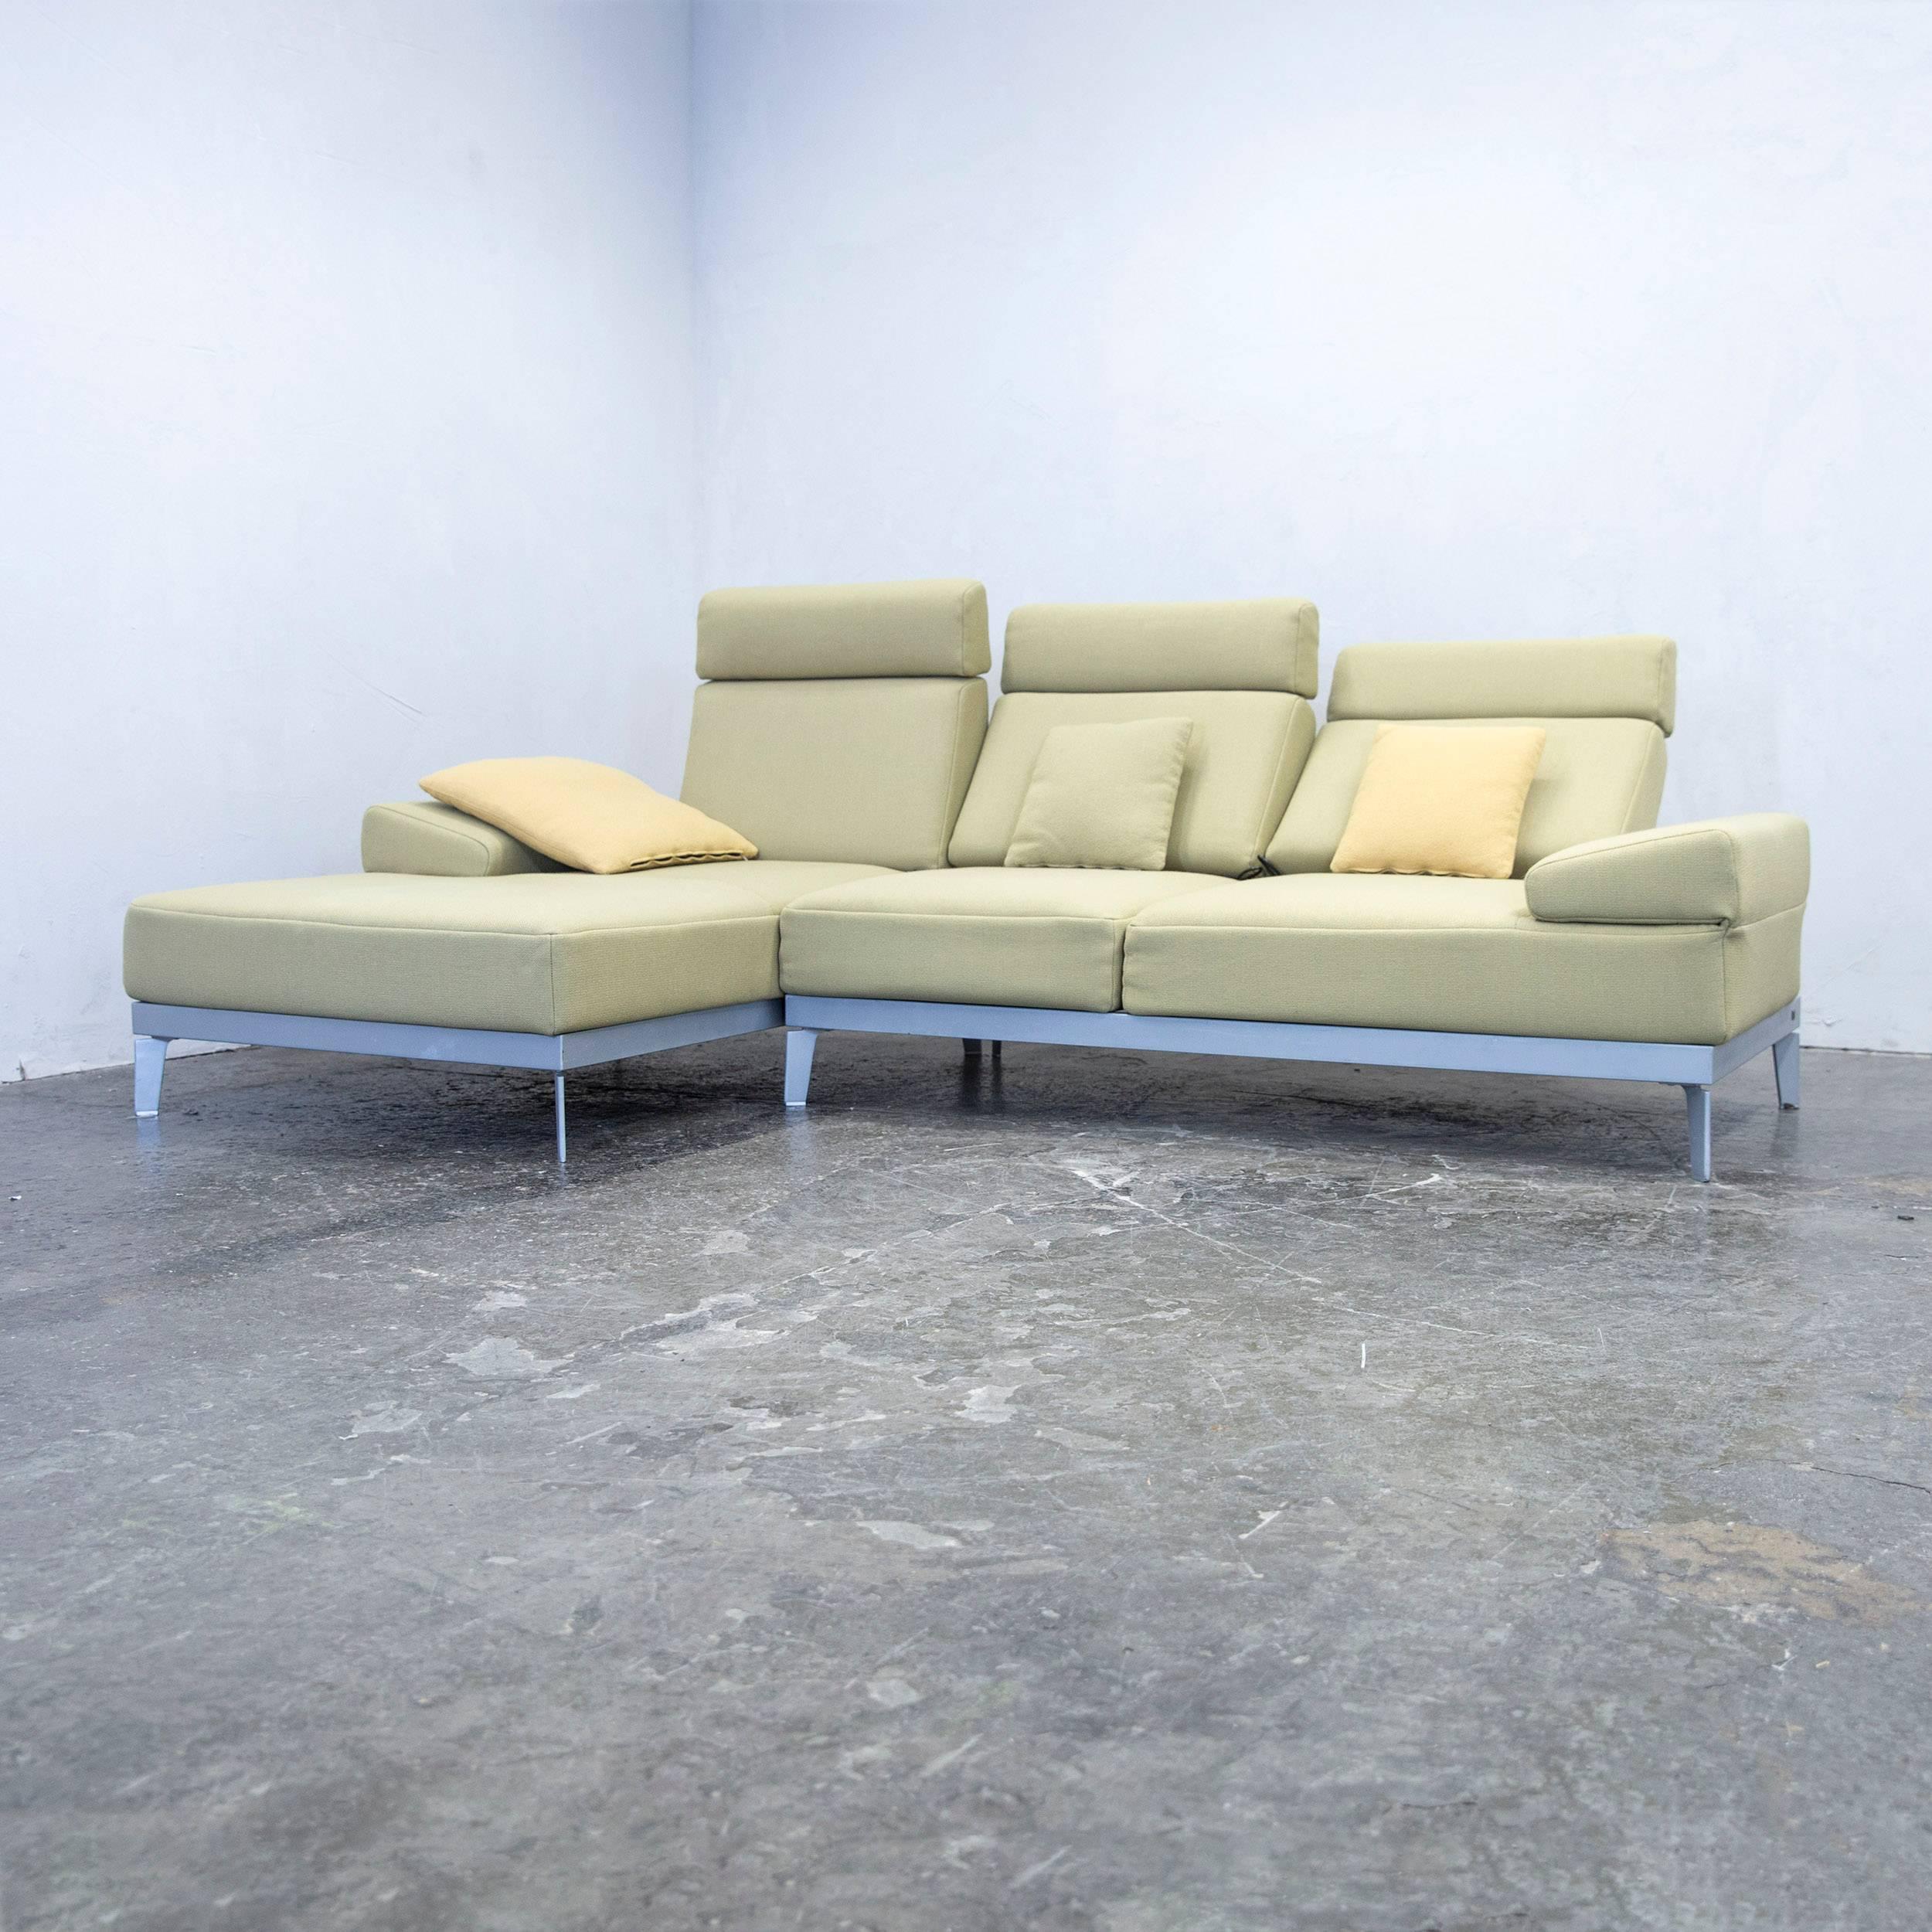 Green colored original Rolf Benz Plura designer corner sofa and footstool, in a minimalistic and modern design, with convenient functions, made for pure comfort and flexibility.